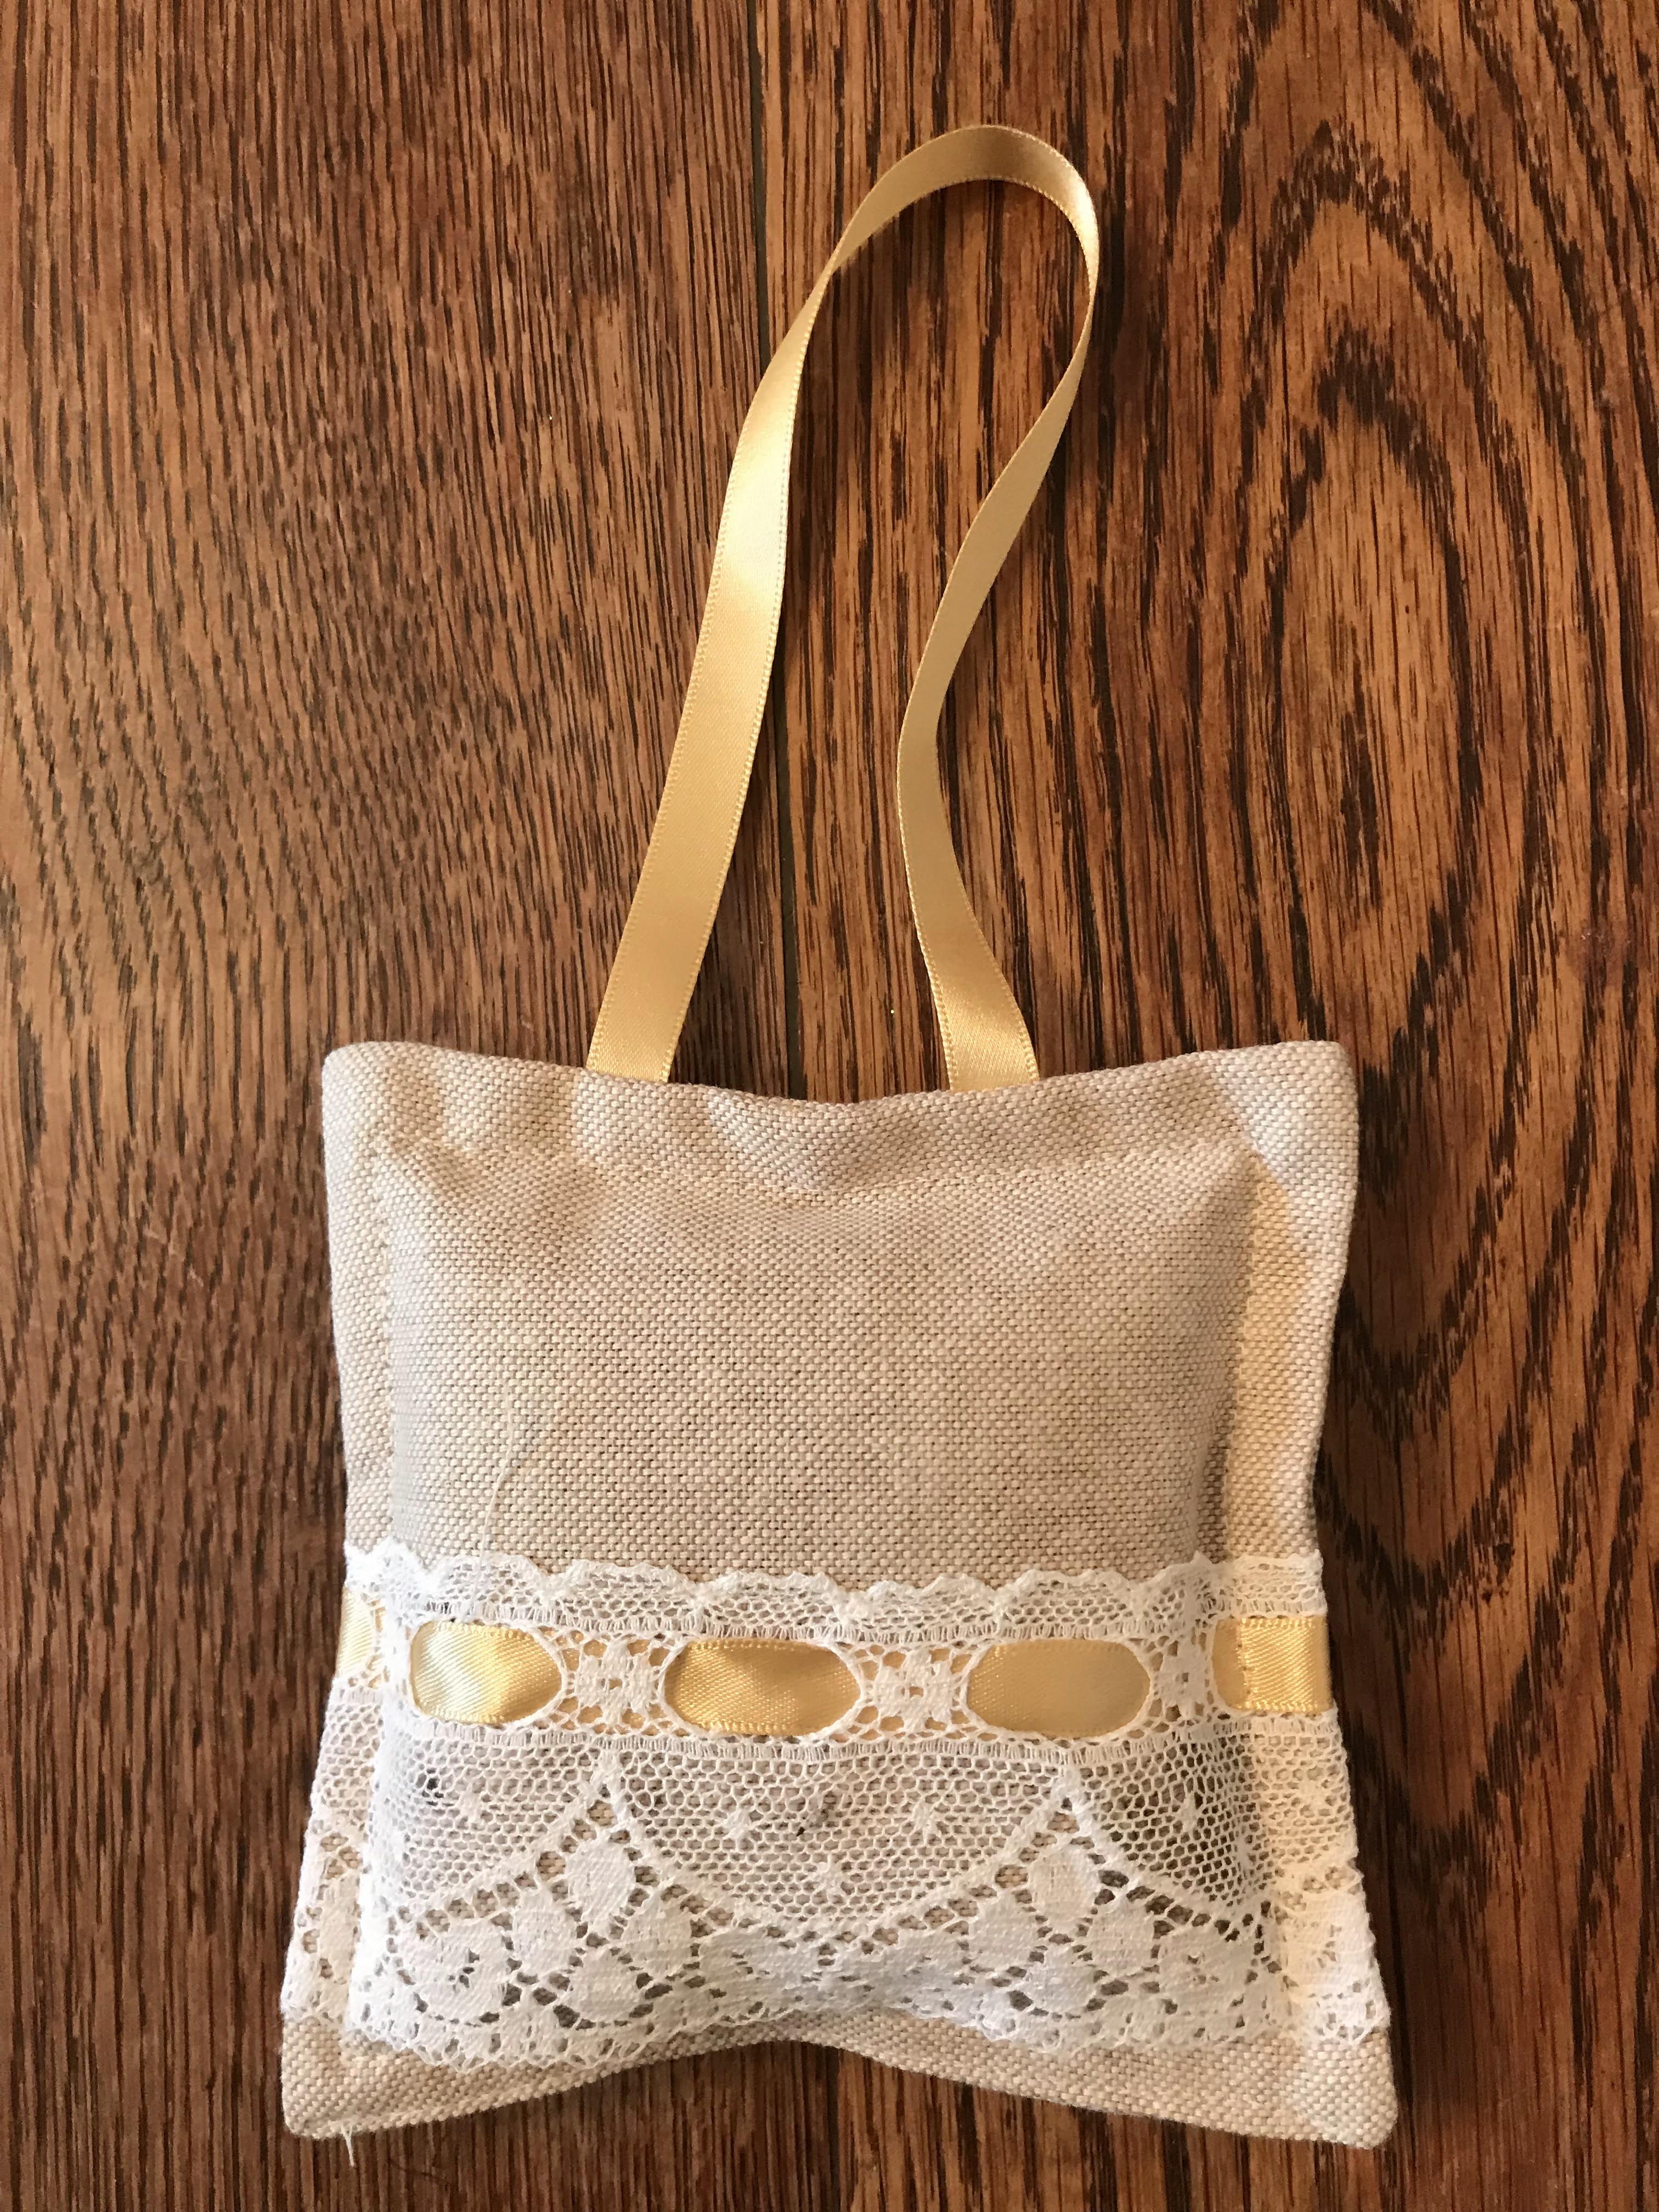 Lavender Bag - lace and gold ribbon